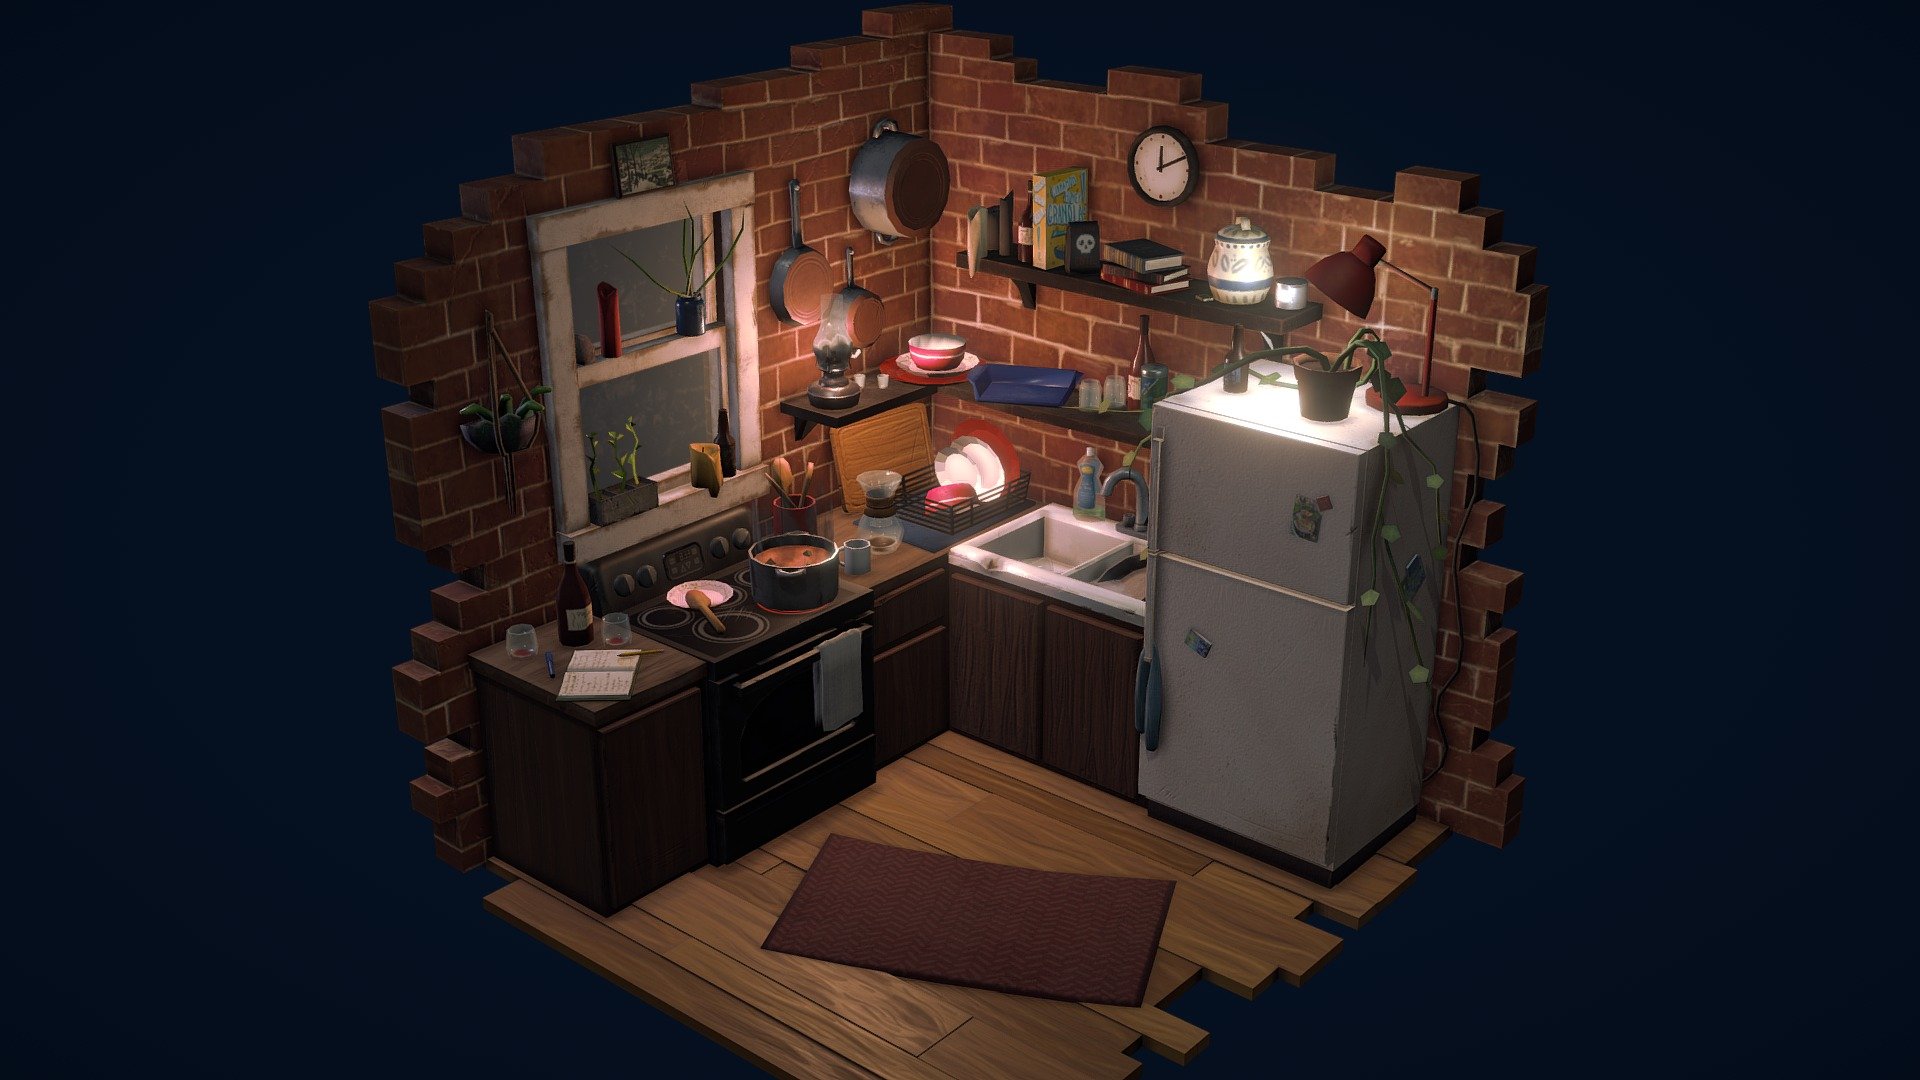 Low-poly, hand-painted kitchen made with love! Tried to make a little isometric room under 20,000 tris, then put a lot of time into the textures themselves. Very happy with how my wood grain came out 3d model